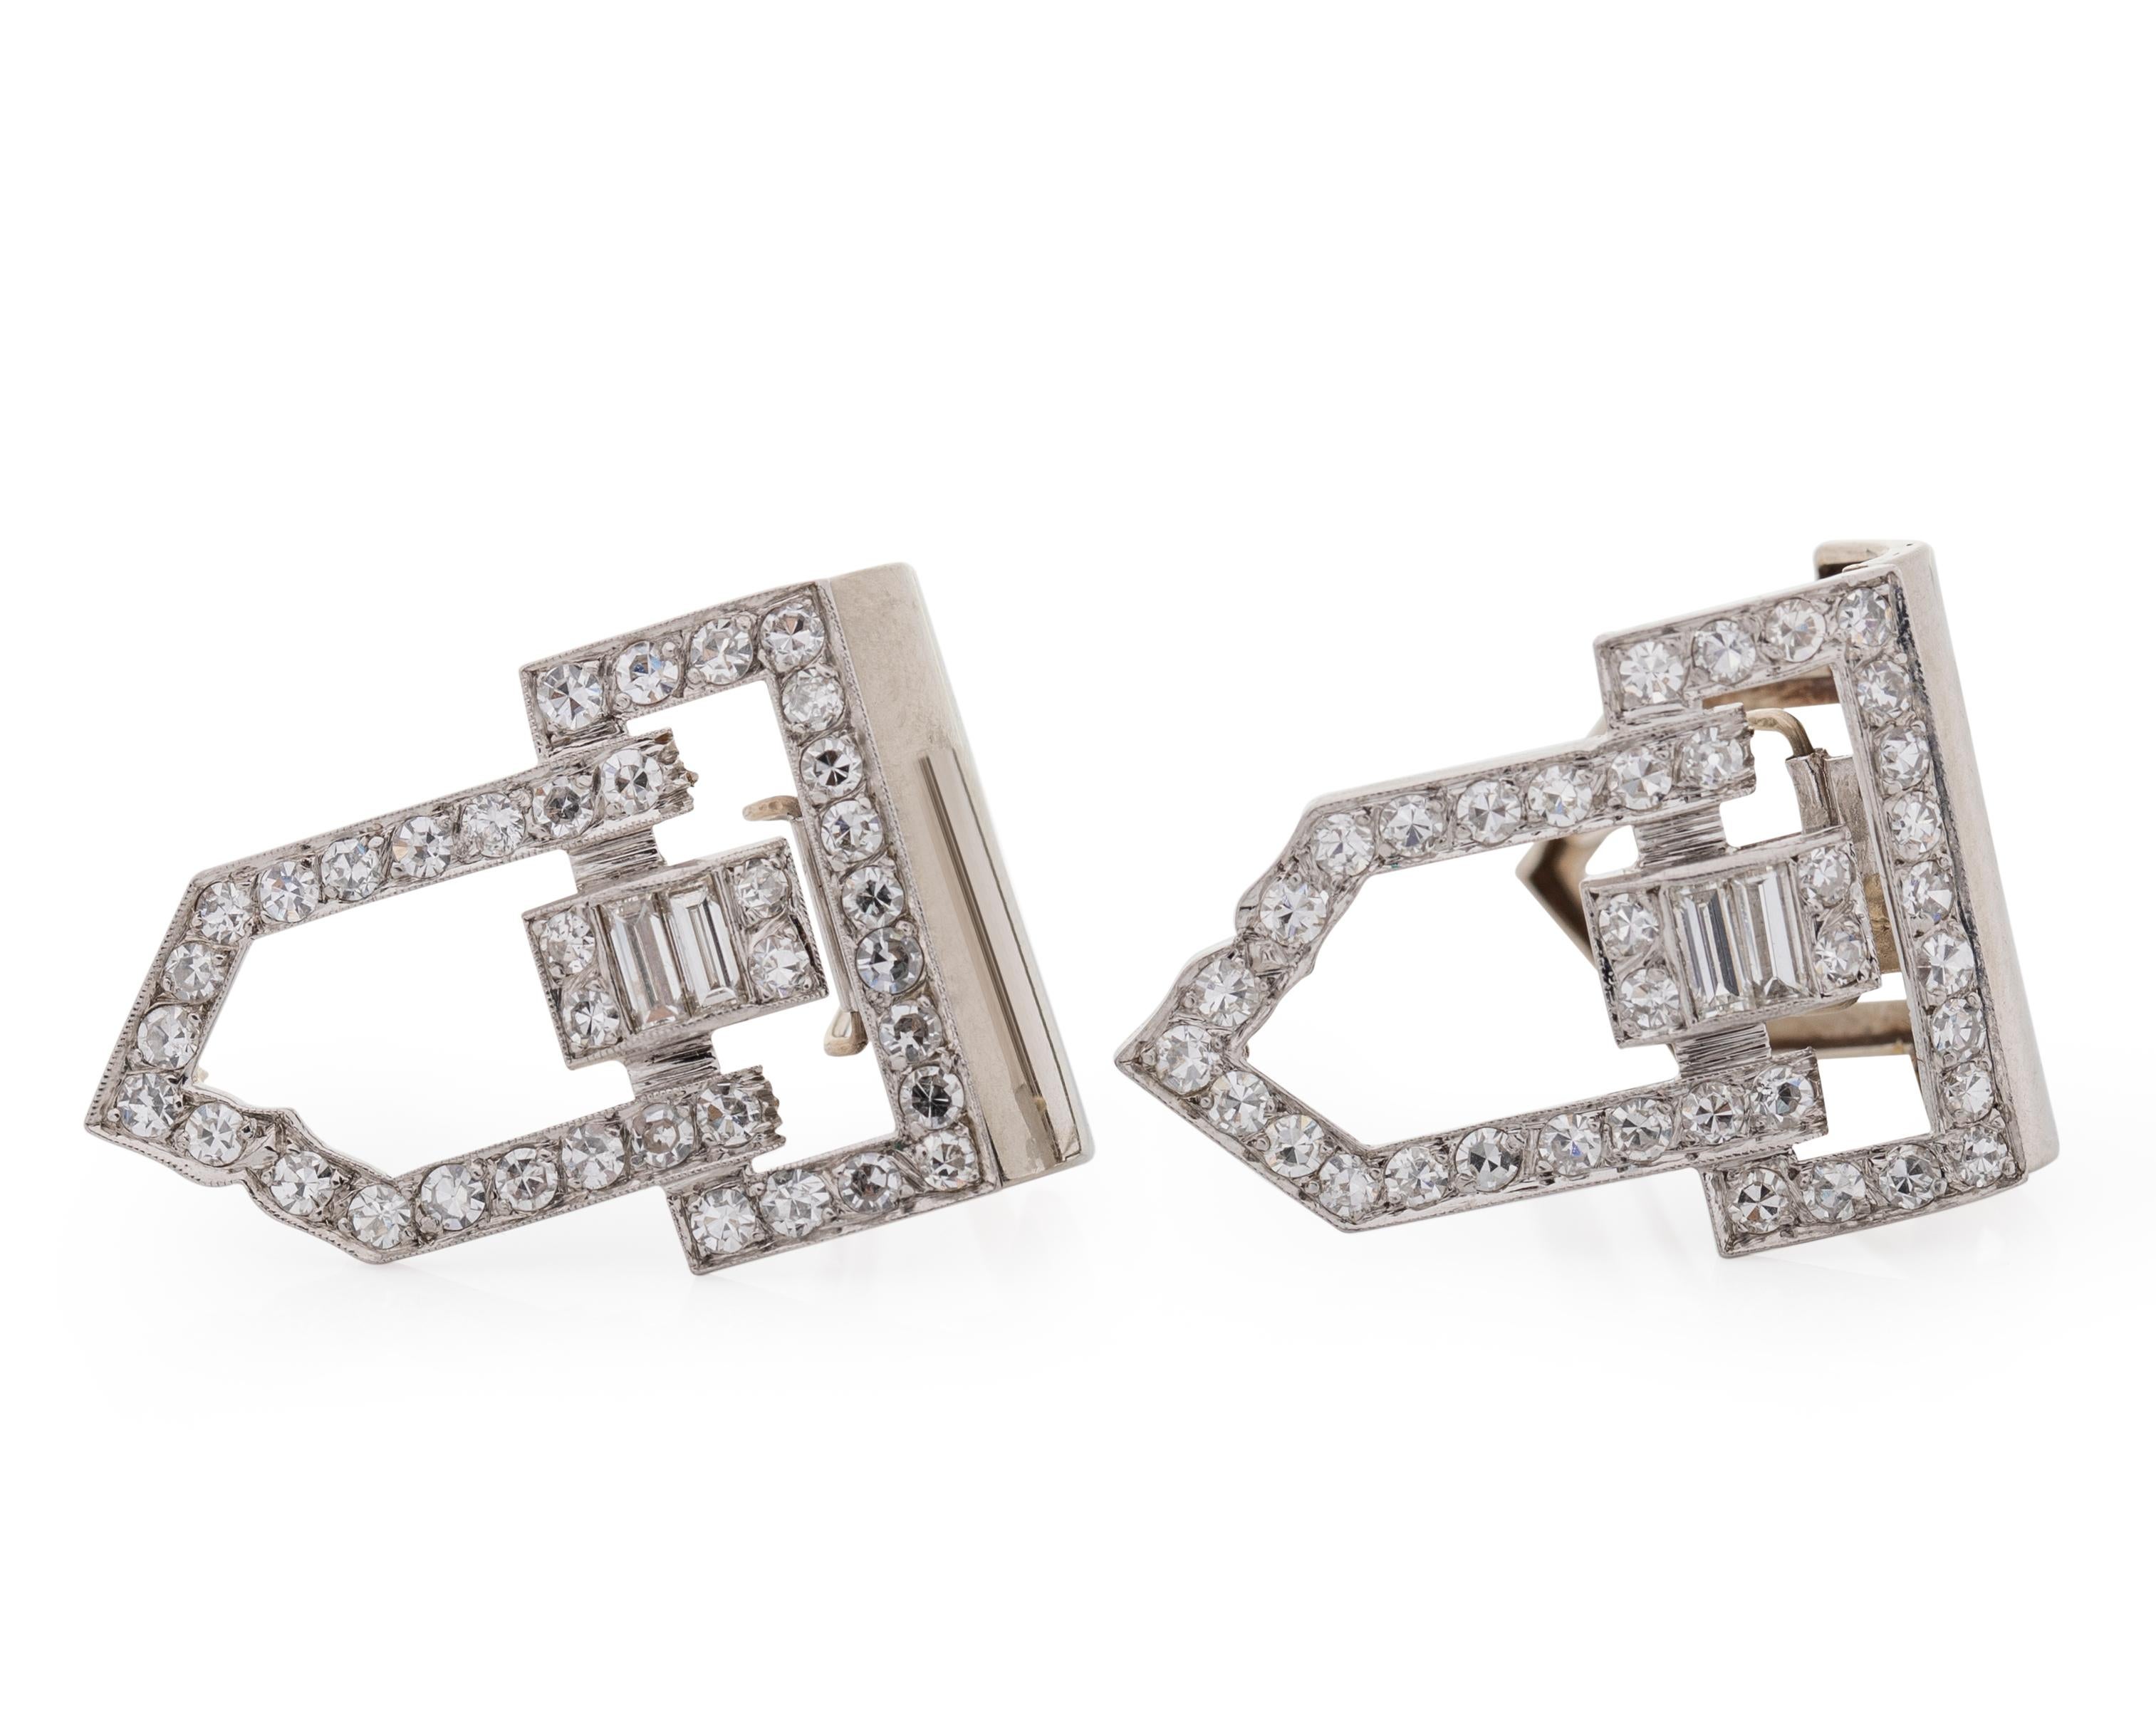 Diamond Details:
Cut: Baguettes & Rounds
Carat: 3 Carat Total
Color: G
Clarity: VS

Clip Details:
Metal type: Platinum
Weight: 12.58 grams
Measures: 1 1/4 inch length x width 

These are fur clips from the 1920s, Art Deco. The diamonds are